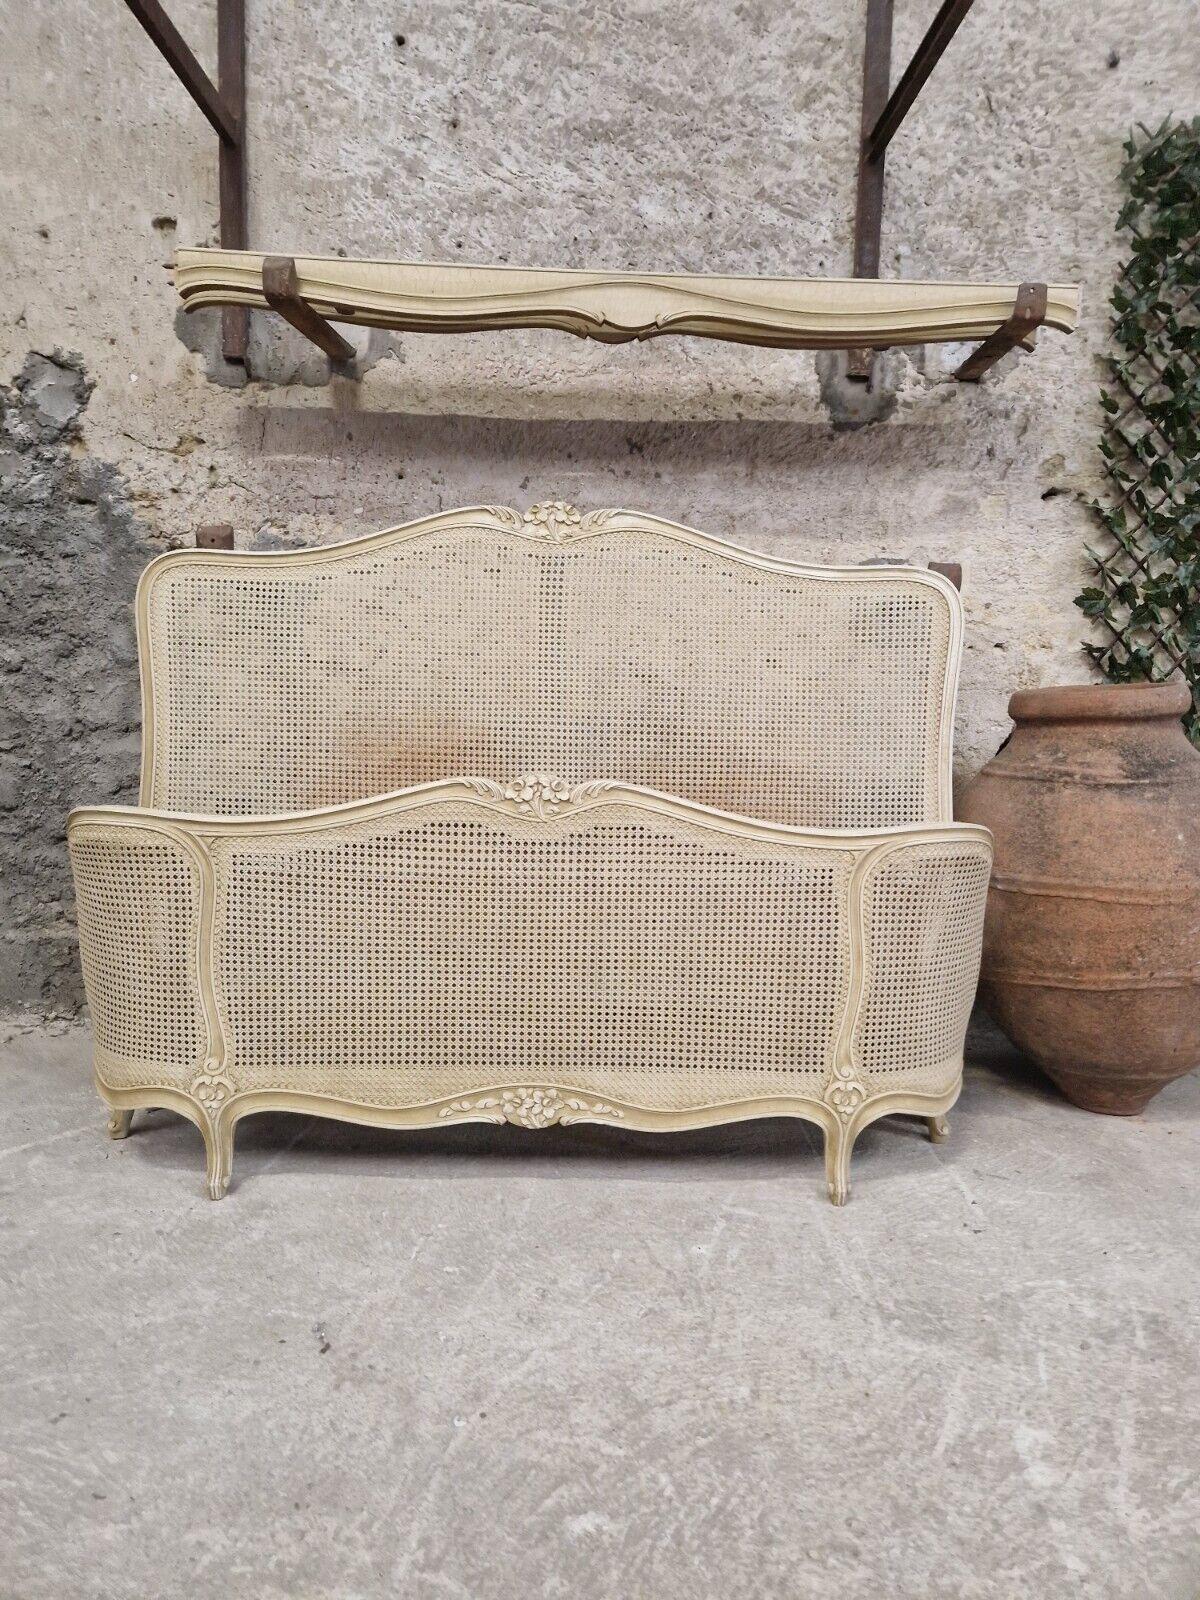 Wood Antique Cane French Bed Corbeille Cream Lacquer Louis XV Style